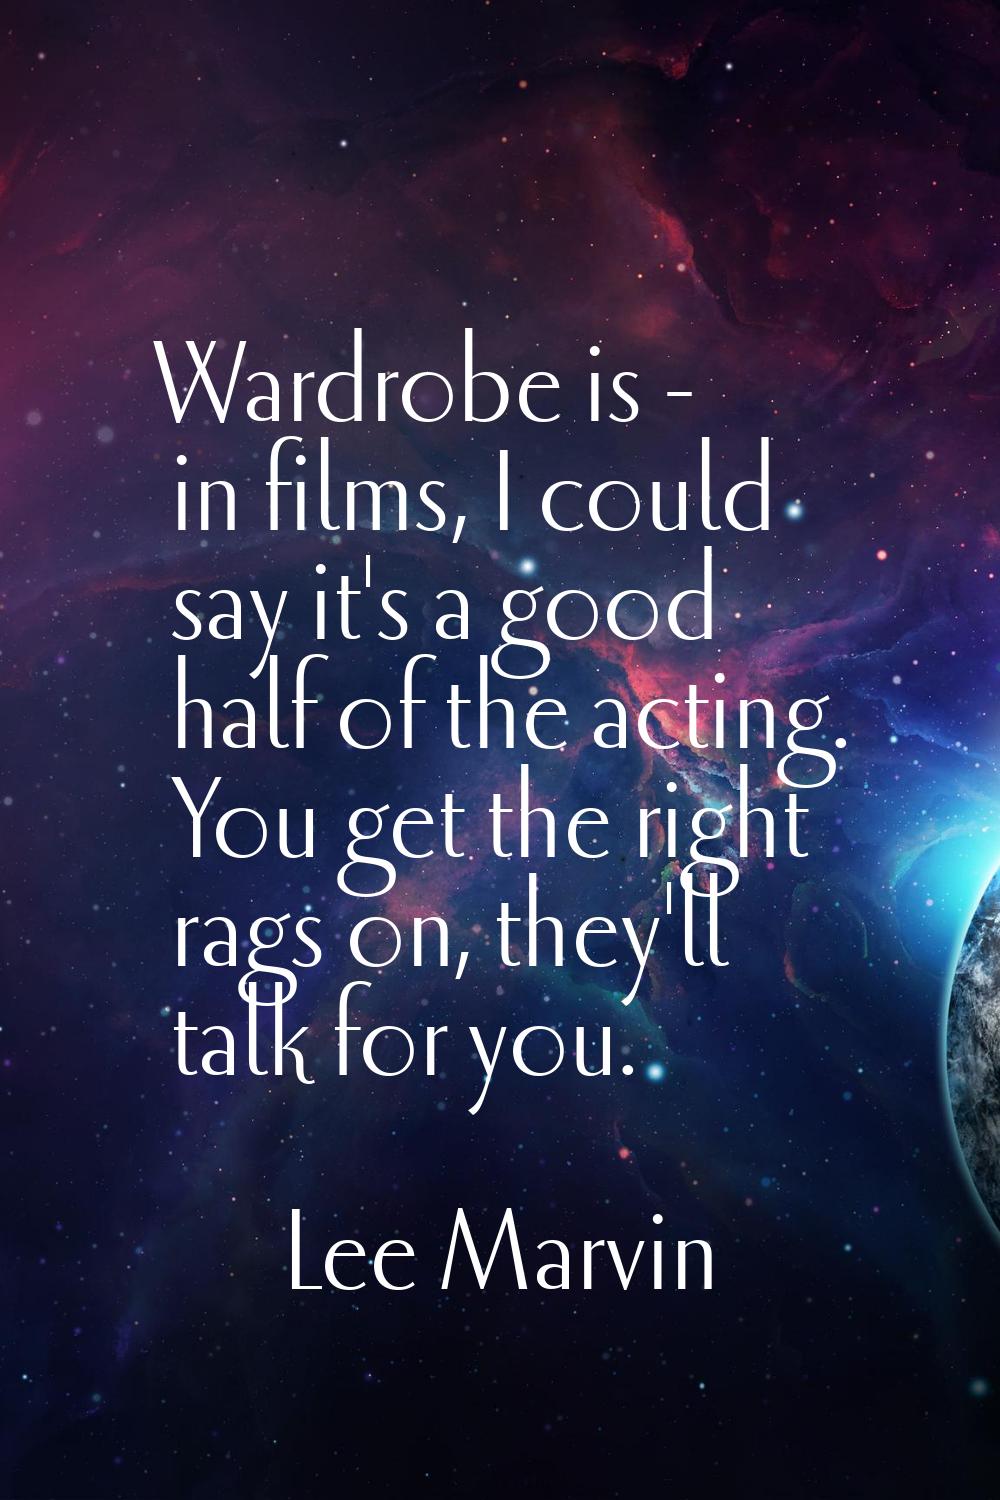 Wardrobe is - in films, I could say it's a good half of the acting. You get the right rags on, they